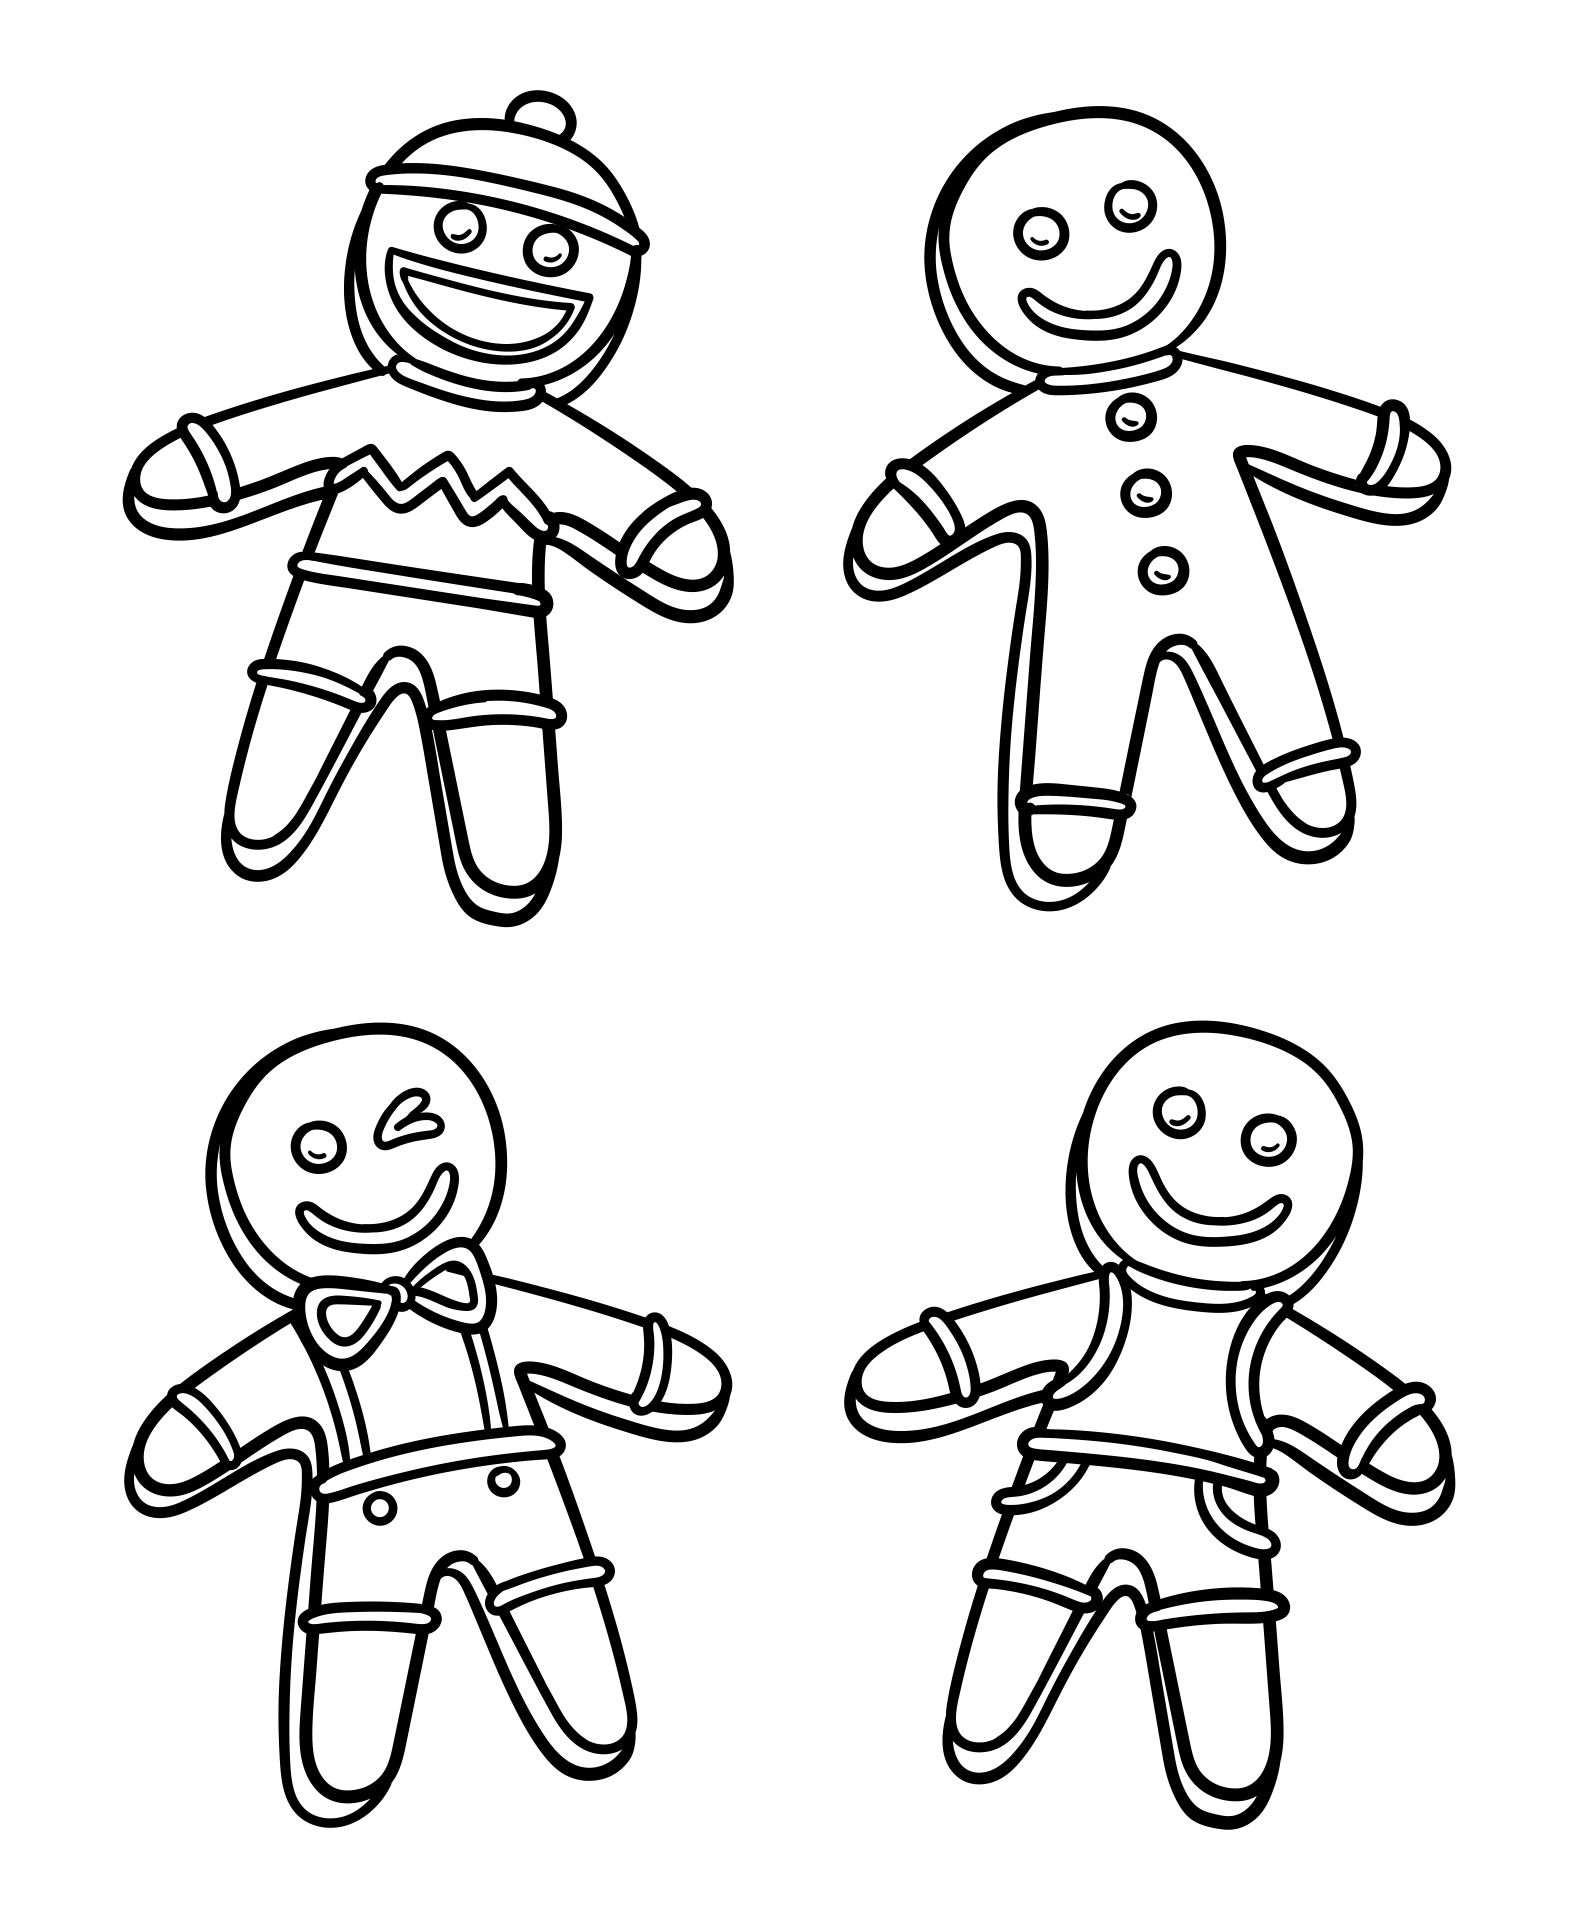 Gingman Christmas Cookie Coloring Pages Printable